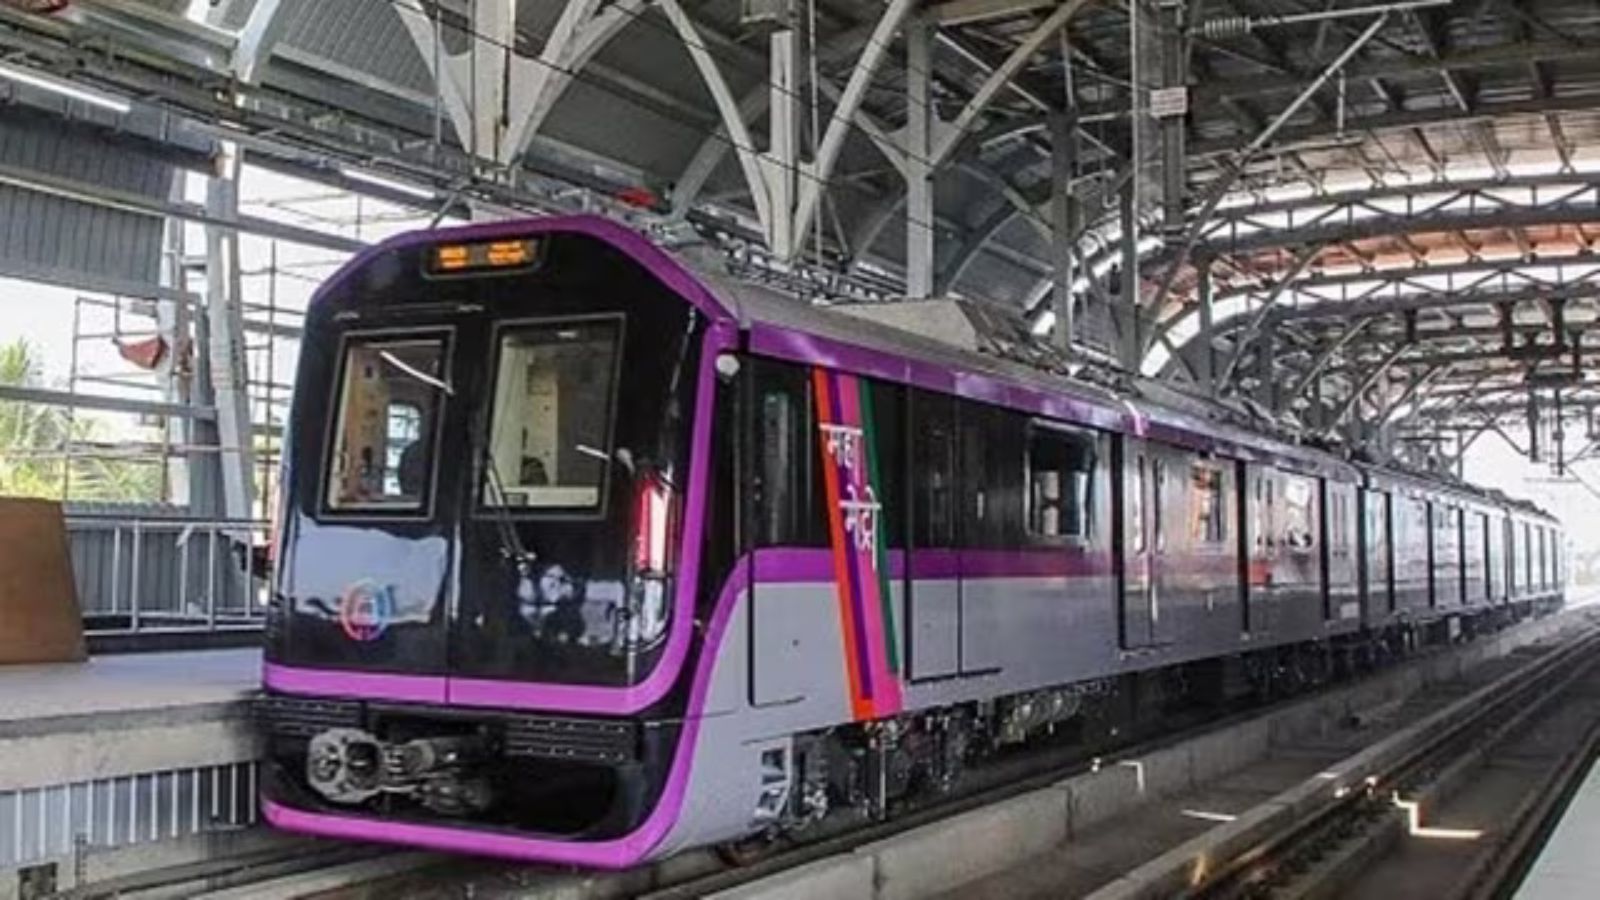 Pune Metro return ticket facility stopped after commuters’ complaints